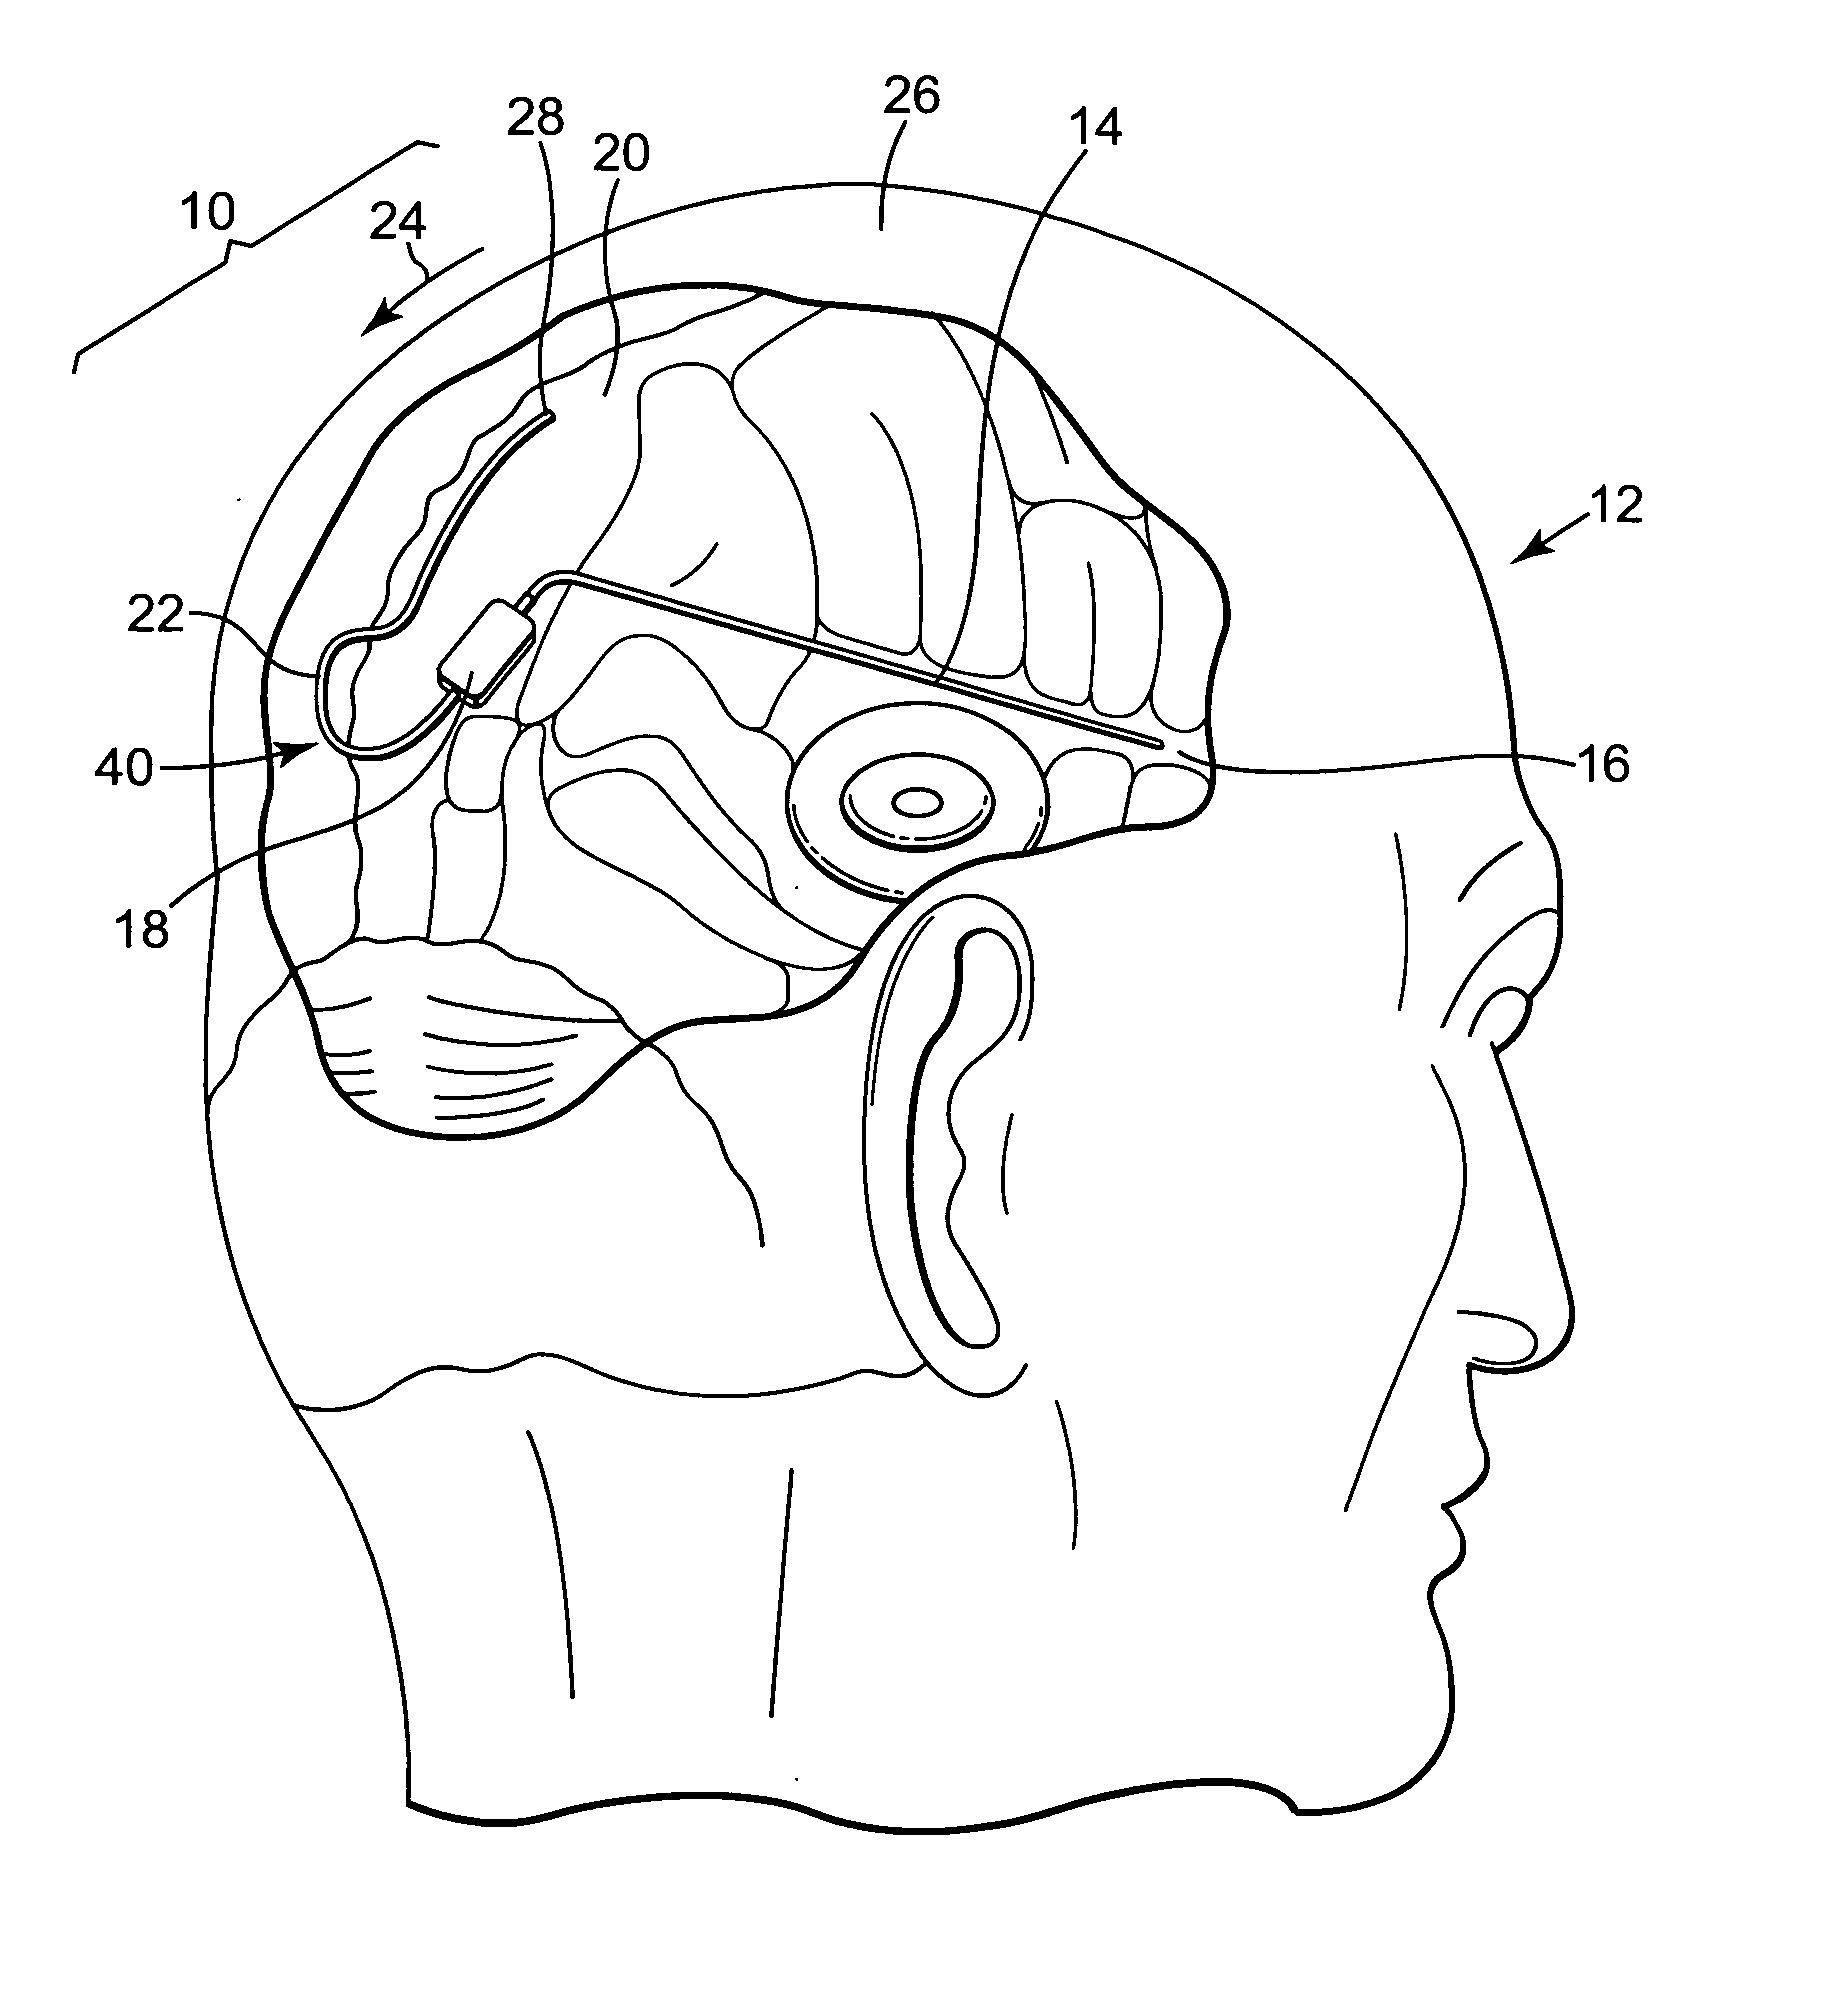 Apparatus and method for retrograde placement of sagittal sinus drainage catheter